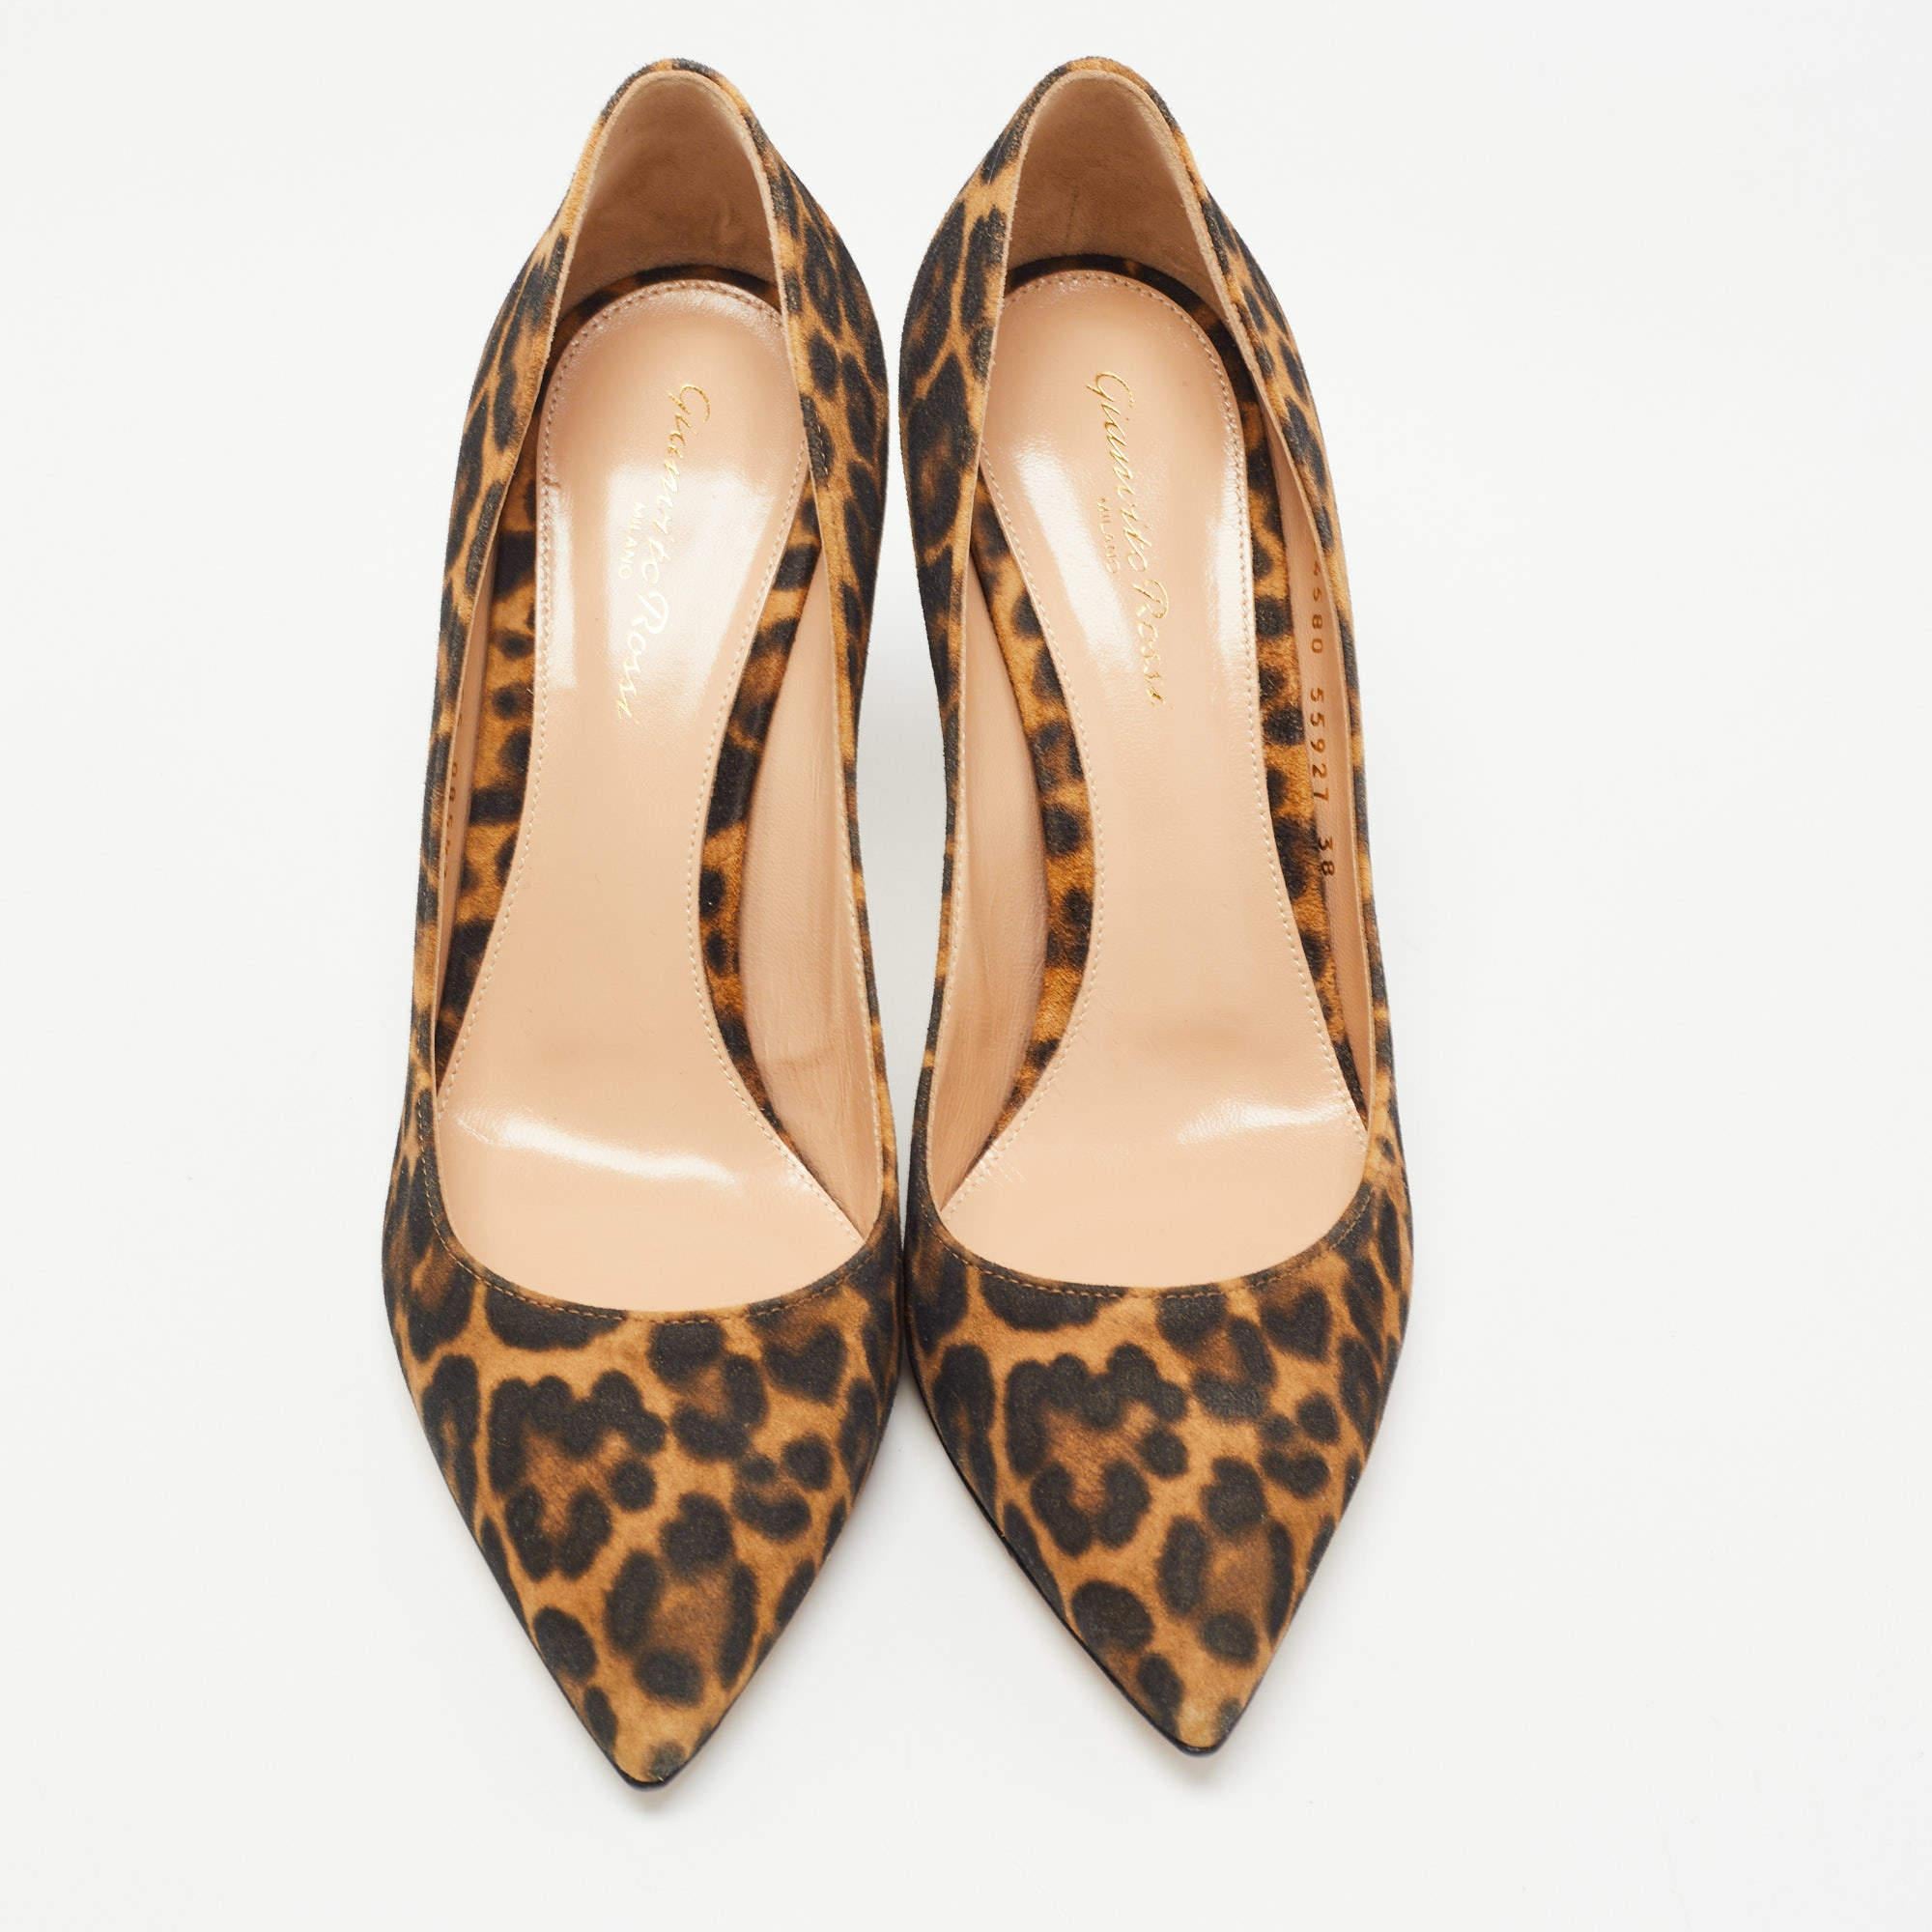 The leopard-printed leather makes this pair of Gianvito Rossi pumps more appealing. Balanced on 9 cm heels, it will elevate you with ease. Sleek and sharp, these shoes are simple yet classy.

Includes: Original Dustbag

